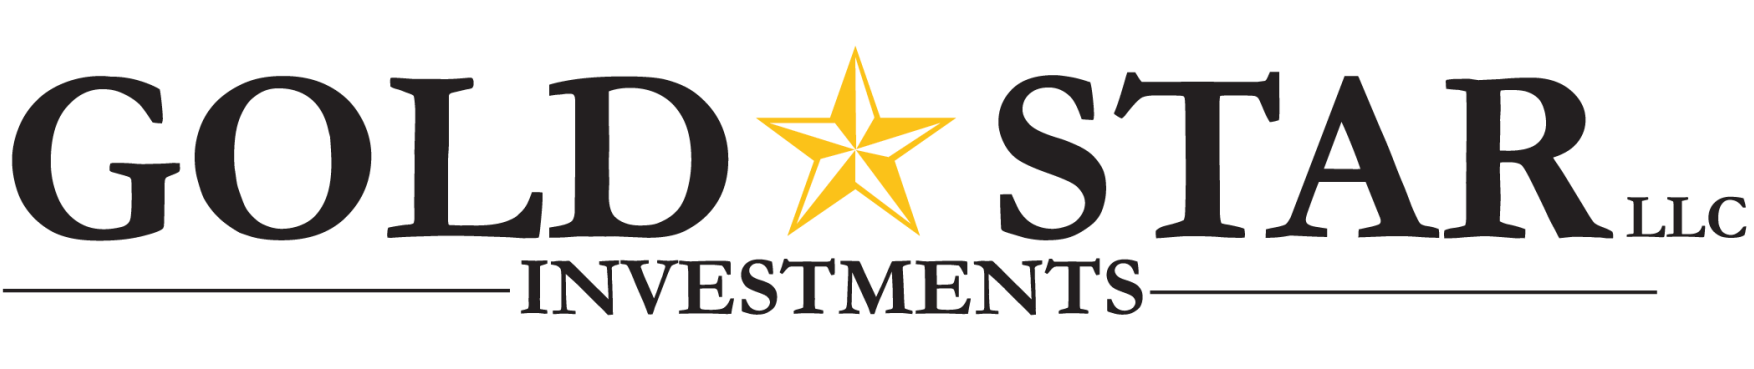 Gold Star Investments Logo in Header - linked to home page